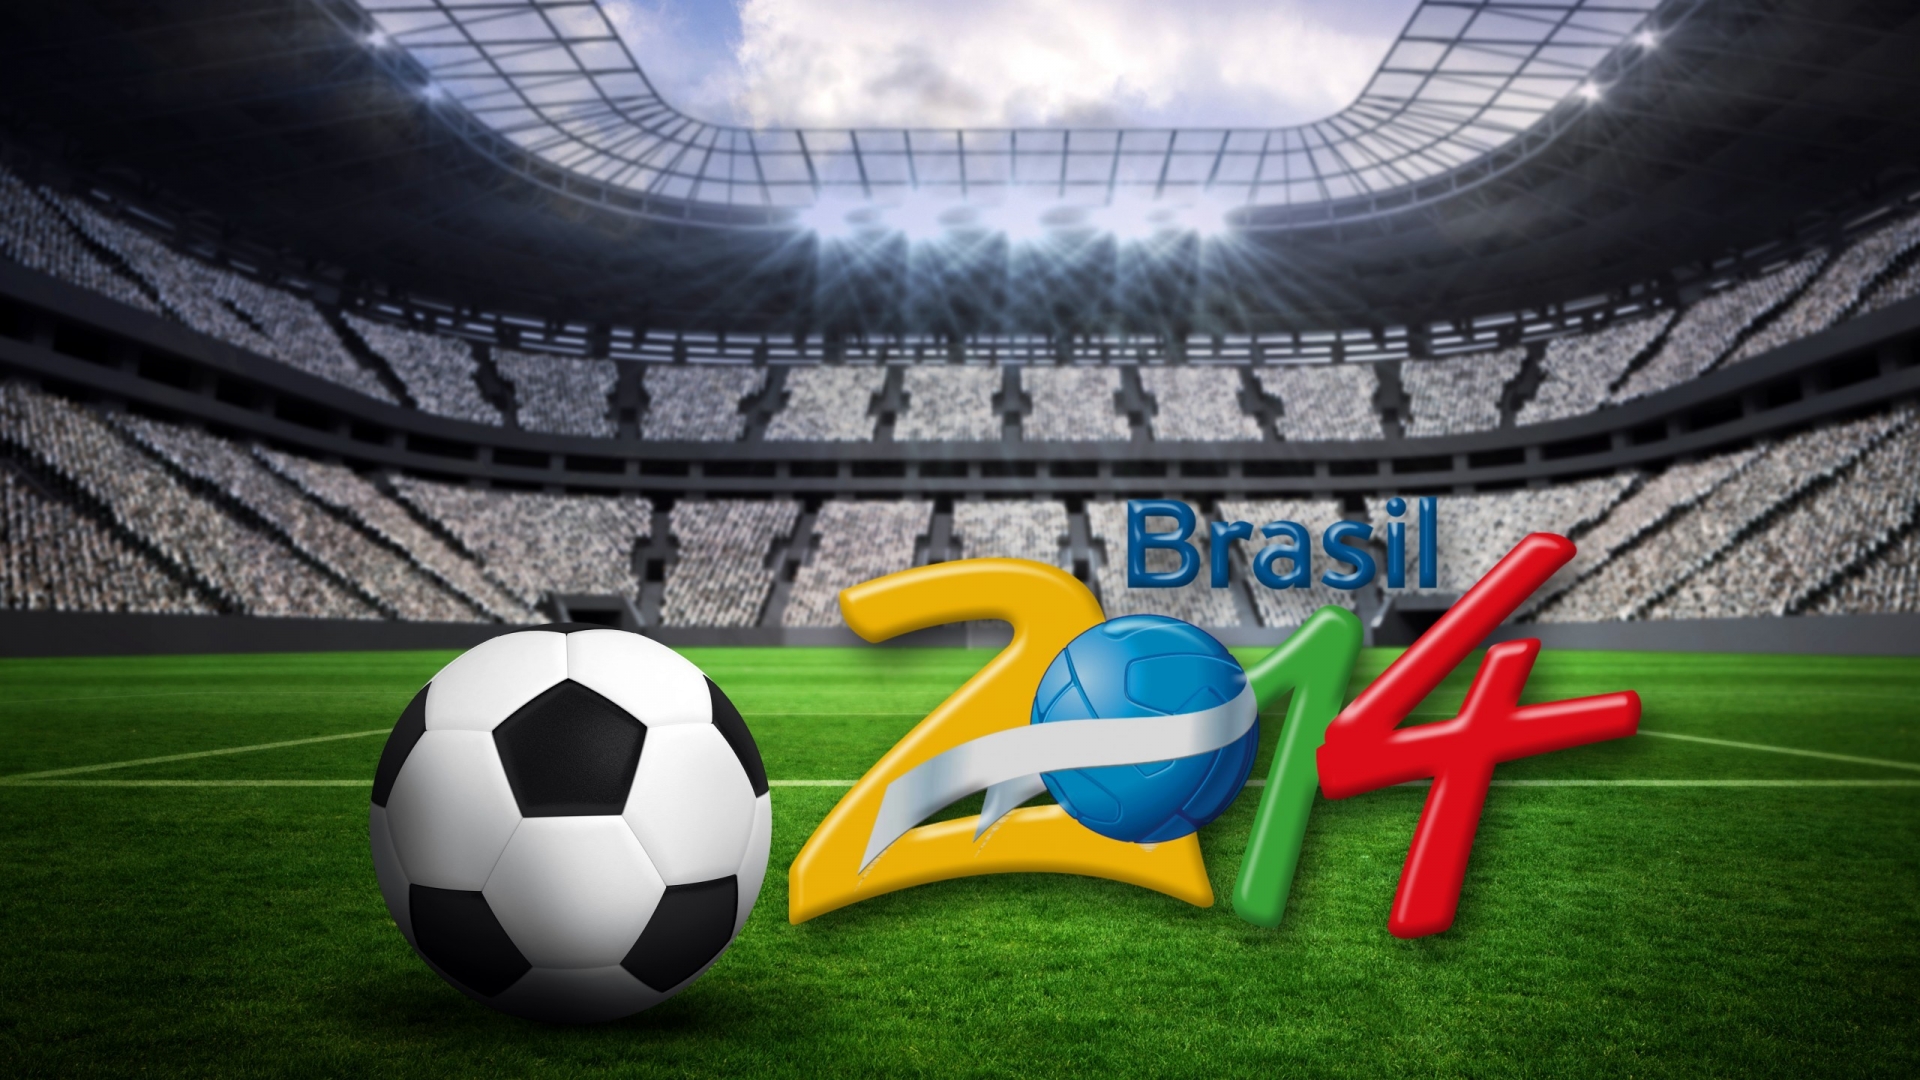 Brasil World Cup 2014 for 1920 x 1080 HDTV 1080p resolution